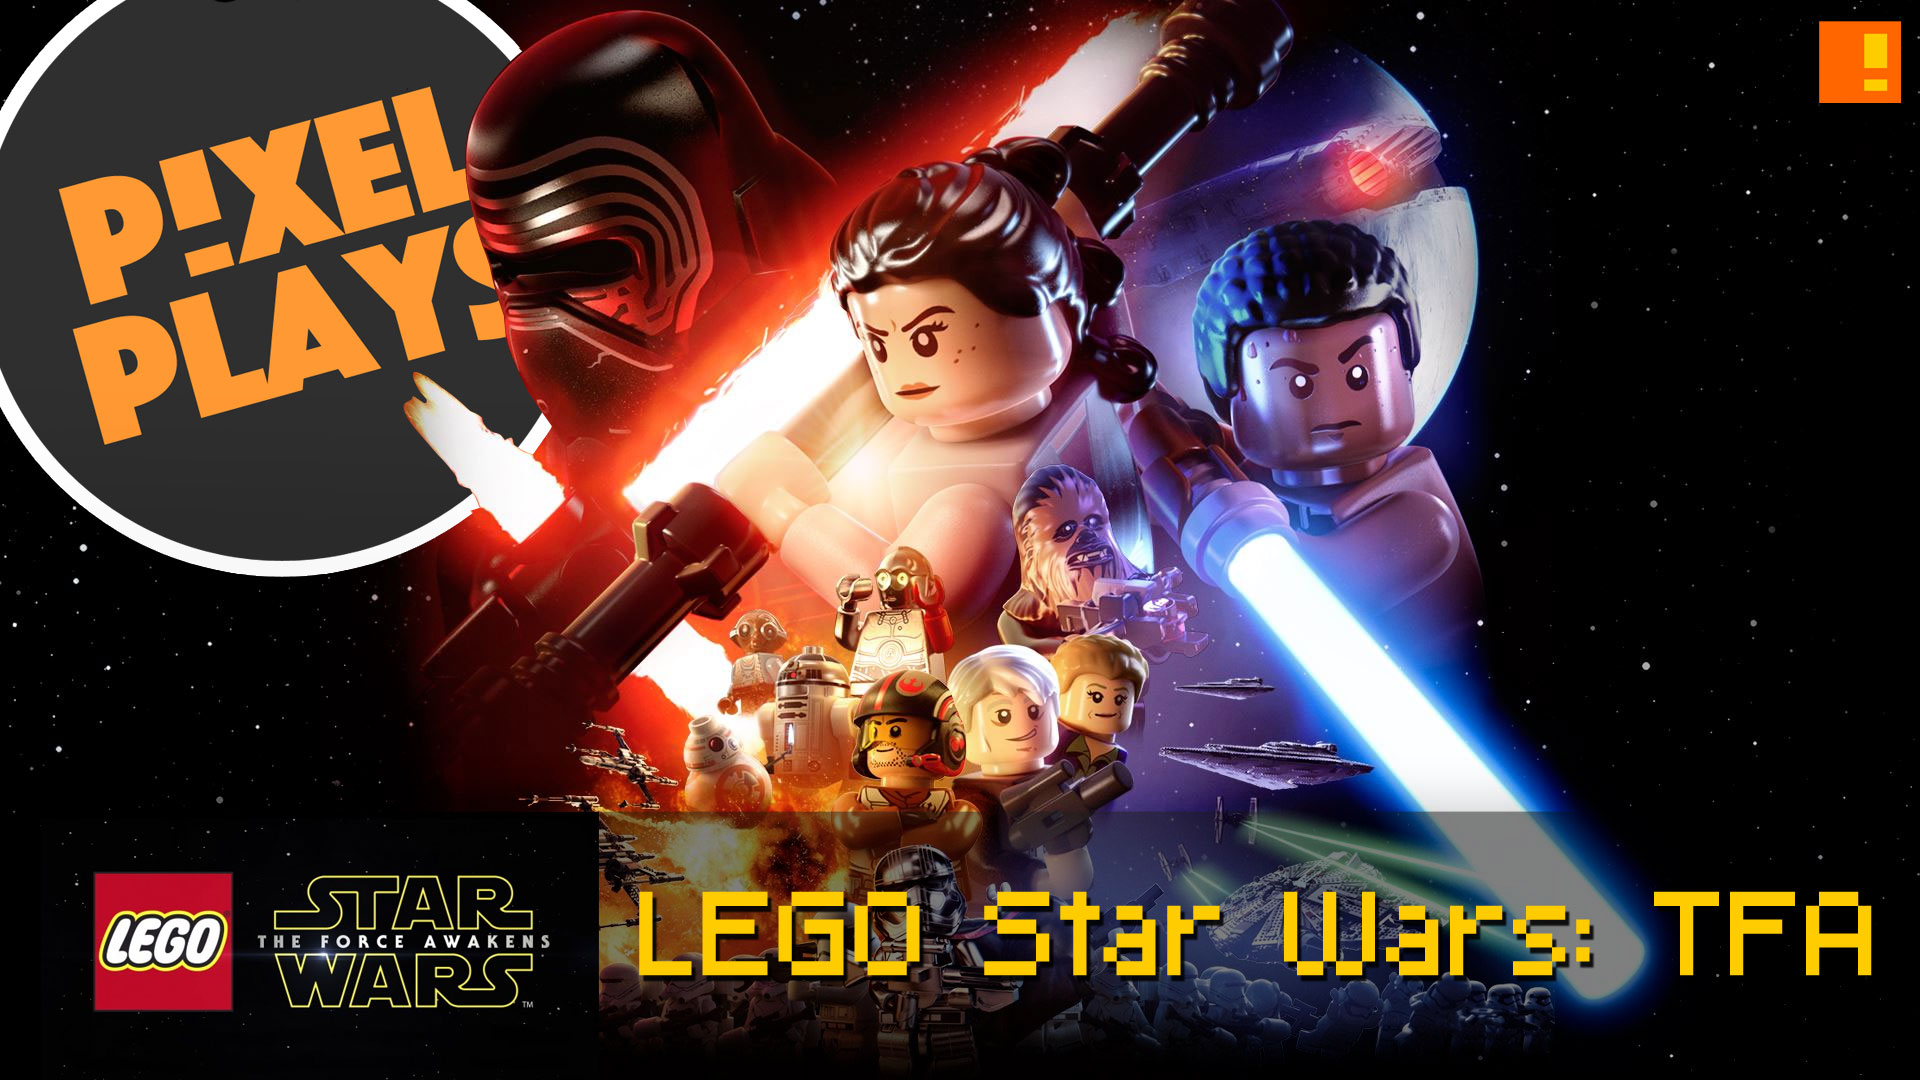 pixel plays, lego star wars, the force awakens, in a galaxy far far away, entertainment on tap, demo, y wing lego star wars, lego star wars y wing starfighter, lego star wars y wing instructions, lego star wars y wing review, lego star wars y wing 9495, lego star wars y wing fighter 7658, lego star wars y-wing starfighter (9495), lego star wars y wing and tie fighter, lego star wars y wing 8037, lego star wars y fighter, lego star wars z-95 headhunter, lego star wars zam wesell, lego star wars zombie, lego star wars z-95 headhunter 75004, lego star wars zombie apocalypse, lego star wars zeb, lego star wars zander, lego star wars zipbin,,, lego star wars zillo beast, lego star wars zillo beast walkthrough, lego star wars z-95 headhunter review, lego star wars z-95 headhunter instructions, lego star wars z-95 headhunter (30240), gry z lego star wars, film z lego star wars, postacie z lego star wars 3, zestawy z lego star wars, sklep z lego star wars, muzyka z lego star wars, figurki z lego star wars, lego star wars 01, lego star wars 0000, lego star wars 03, lego star wars 0001, lego star wars 001, lego star wars 00001, lego star wars #006, lego star wars games 0, lego star wars t7-01, lego star wars 35 000 clones, lego star wars 0, jogos lego star wars 0, gry lego star wars 0, lego star wars 1999, lego star wars 10236 ewok village, lego star wars 1 cheats, lego star wars 10188, lego star wars 10179, lego star wars 10240, lego star wars 10225 r2d2, lego star wars 100, lego star wars 10221, lego star wars 111, slave 1 lego star wars, episode 1 lego star wars, slave 1 lego star wars complete saga, episode 1 lego star wars walkthrough, day 1 lego star wars advent calendar, level 1 lego star wars, stranger 1 lego star wars, episode 1 lego star wars sets, slave 1 lego star wars 2, day 1 lego star wars advent calendar 2014, lego star wars 2017, lego star wars 2017 sets, lego star wars 2016 death star, lego star wars 2015, lego star wars 2 walkthrough,, lego star wars 2016 advent calendar, lego star wars 2014, lego star wars 2017 winter sets, lego star wars 2016 summer, lego 2 star wars cheats, lego 2 star wars games,, playstation 2 lego star wars,, playstation 2 lego star wars cheats, episode 2 lego star wars, playstation 2 lego star wars walkthrough, playstation 2 lego star wars 3, play 2 lego star wars, 2 player lego star wars 3, slave 2 lego star wars, lego star wars 3 cheats, lego star wars 3 walkthrough, lego star wars 3 characters, lego star wars 3ds,, lego star wars 3 minikits, lego star wars 3 cheats wii, lego star wars 3 xbox 360, lego star wars 3 review, lego star wars 3 game,, lego star wars 3 wii, lego 3 star wars cheats, lego 3 star wars walkthrough, lego 3 star wars games, playstation 3 lego star wars, episode 3 lego star wars, level 3 lego star wars, chapter 3 lego star wars, episode 3 lego star wars walkthrough, playstation 3 lego star wars 2, episode 3 lego star wars sets, lego star wars 4 the clone wars, lego star wars 4504, lego star wars 4502, lego star wars 4483, lego star wars 4 player, lego star wars 4-lom, lego star wars 4479, lego star wars 4482, lego star wars 4-6, lego star wars 4 5 6, for lego star wars 3,, for lego star wars, playstation 4 lego star wars, episode 4 lego star wars, level 4 lego star wars, episode 4 lego star wars walkthrough, chapter 4 lego star wars 3, chapter 4 lego star wars, tc-4 lego star wars, series 4 lego star wars, lego star wars 501st, lego star wars 501st clone trooper, lego star wars 501st battle pack, lego star wars 501, lego star wars 5th brother, lego star wars 5 year old,, lego star wars 5 movie, lego star wars 501st army, lego star wars 501st clone trooper battle pack, lego star wars 501st sets, level 5 lego star wars, top 5 lego star wars sets, chapter 5 lego star wars, chapter 5 lego star wars 3, episode 5 lego star wars walkthrough, episode 5 lego star wars, level 5 lego star wars ipad, top 5 lego star wars games, top 5 lego star wars, chapter 5 lego star wars 2,, lego star wars 6211, lego star wars 6212, lego star wars 6209, lego star wars 6210,, lego star wars 66535, lego star wars 6208, lego star wars 6206, lego star wars 66512, lego star wars 6205, lego star wars 66473, mse-6 lego star wars 3, episode 6 lego star wars, episode 6 lego star wars walkthrough, chapter 6 lego star wars, level 6 lego star wars, chapter 6 lego star wars 3, level 6 lego star wars wii, red brick 6 lego star wars 3, power brick 6 lego star wars 2, power brick 6 lego star wars, lego star wars 7 sets, lego star wars 7 game, lego star wars 75102, lego star wars 75105, lego star wars 75055, lego star wars 7 release date, lego star wars 75054, lego star wars 75103, lego star wars 7 trailer, lego star wars 75093, episode 7 lego star wars, windows 7 lego star wars, windows 7 lego star wars theme, episode 7 lego star wars sets, power brick 7 lego star wars, power brick 7 lego star wars the complete saga, power brick 7 lego star wars 2, lego star wars 7, lego star wars 7 games, lego star wars 7 the video game, lego star wars 8039, lego star wars 8080, lego star wars 8038, lego star wars 8014, lego star wars 8088, lego star wars 8096,, lego star wars 8098, lego star wars 8097,, lego star wars 8017, lego star wars 8083, windows 8 lego star wars, lego 8-14 star wars, lego star wars 8, lego star wars 8 games,, lego star wars episode 8, lego star wars part 8, lego star wars 7 8 9, lego star wars 3 8, lego star wars level 8, the 8 bit theater lego star wars, lego star wars 9500, lego star wars 9488, lego star wars 9516, lego star wars 9493, lego star wars 9496, lego star wars 9494, lego star wars 9515, lego star wars 9500 sith fury-class interceptor, lego star wars 9491, lego star wars 9497, red brick 9 lego star wars 3, power brick 9 lego star wars 2, power brick 9 lego star wars, lego star wars 9, lego star wars 9-14, lego star wars 9 games, lego star wars episode 9, lego star wars part 9, lego star wars ages 9-14, lego star wars episode 9 part 1,